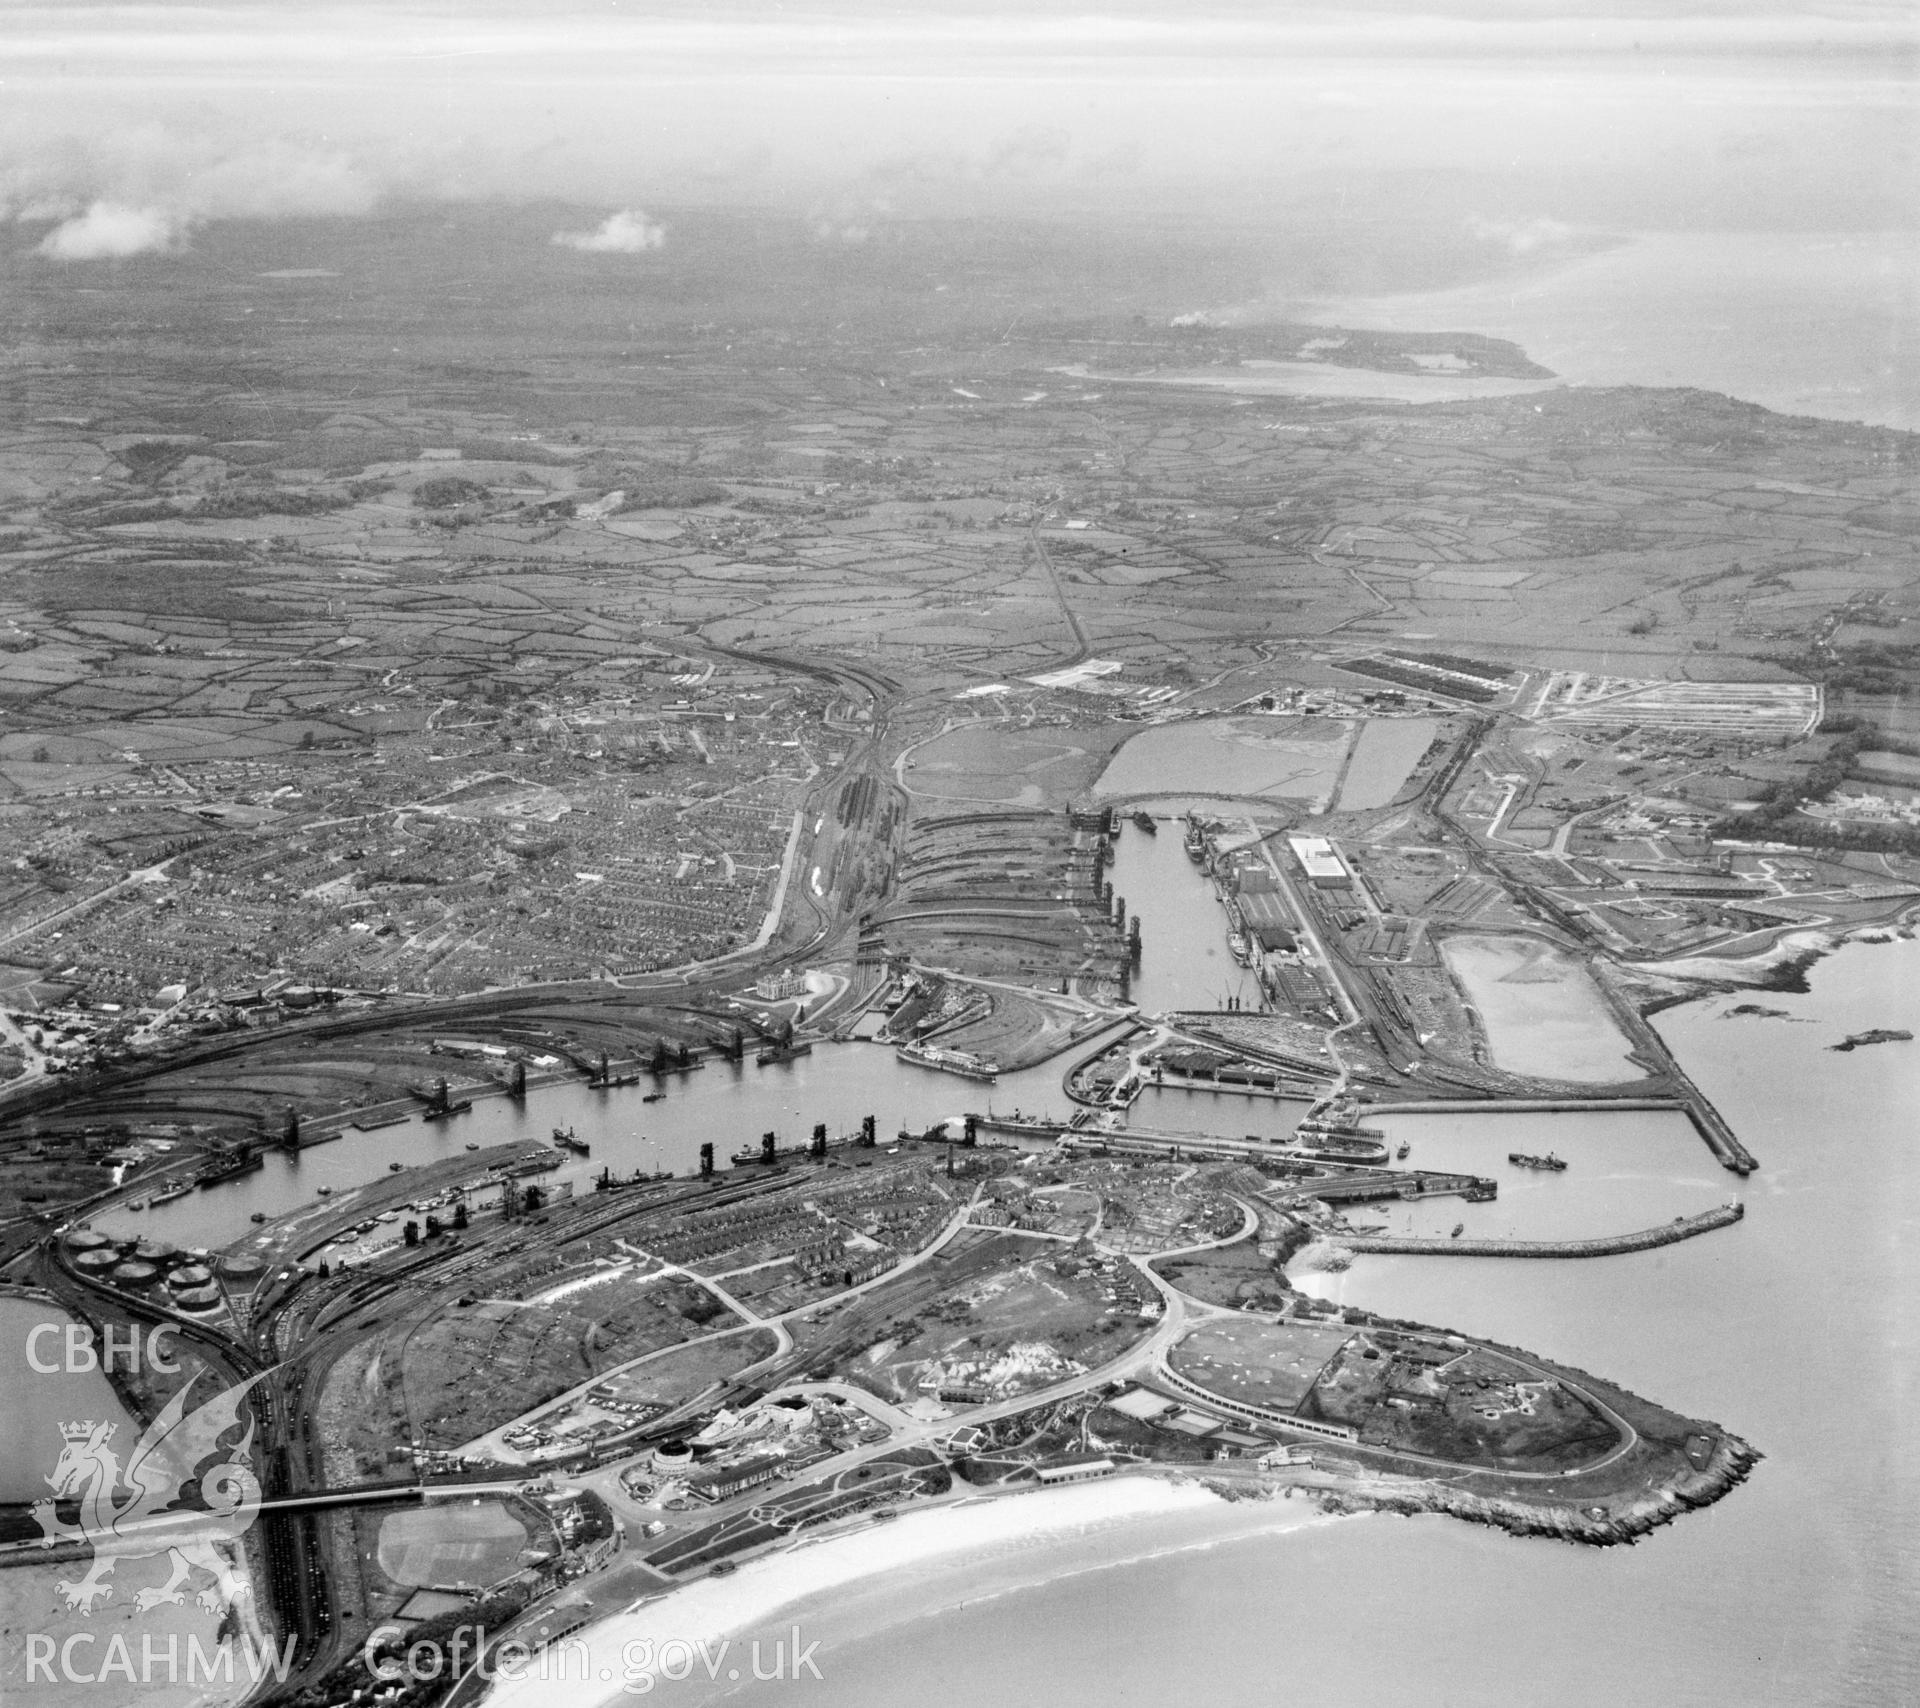 General view of Barry showing docks